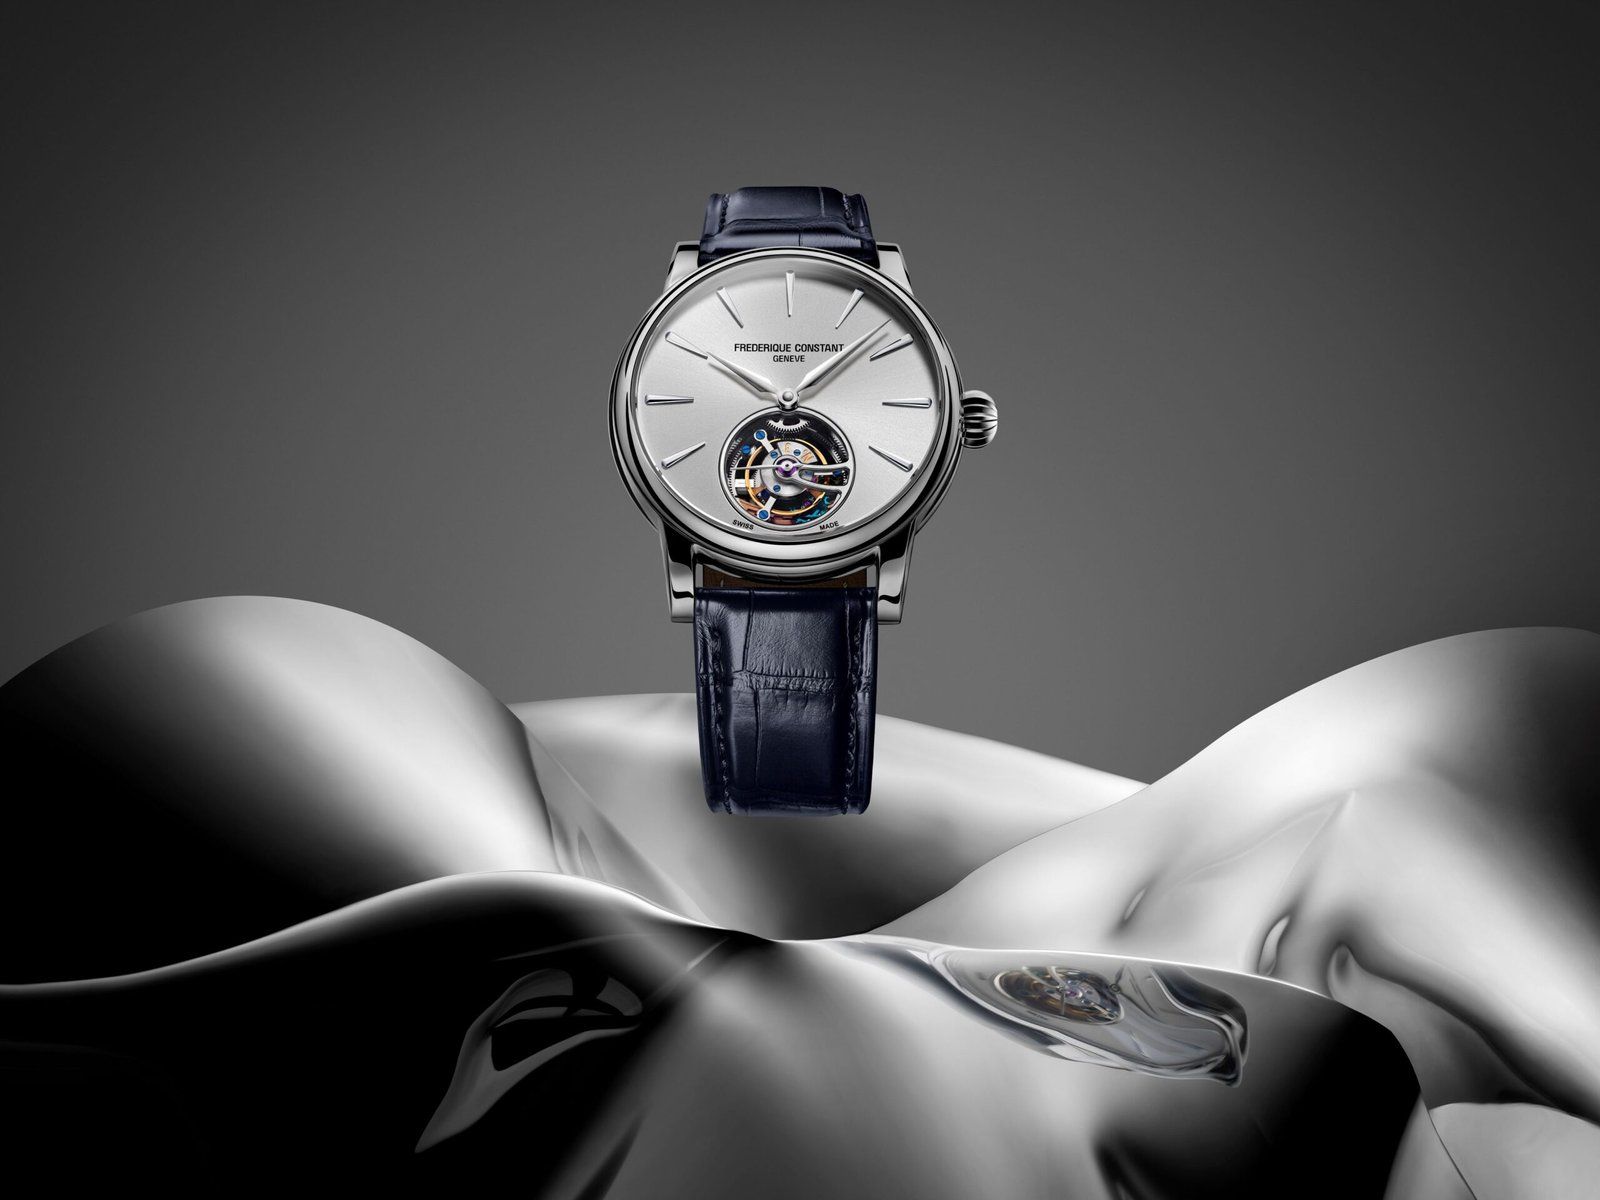 The Classics Tourbillon Manufacture with a grey dial and sunray finishing